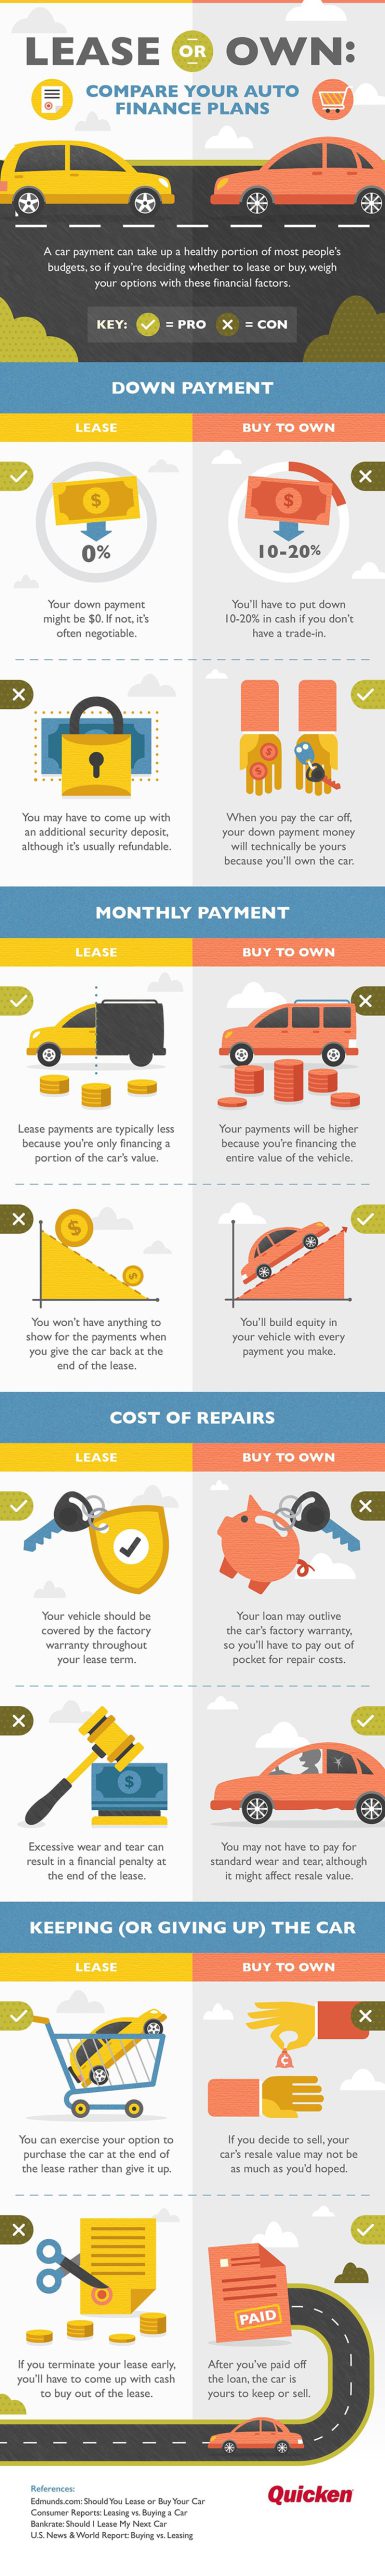 Lease or Own Auto Infographic